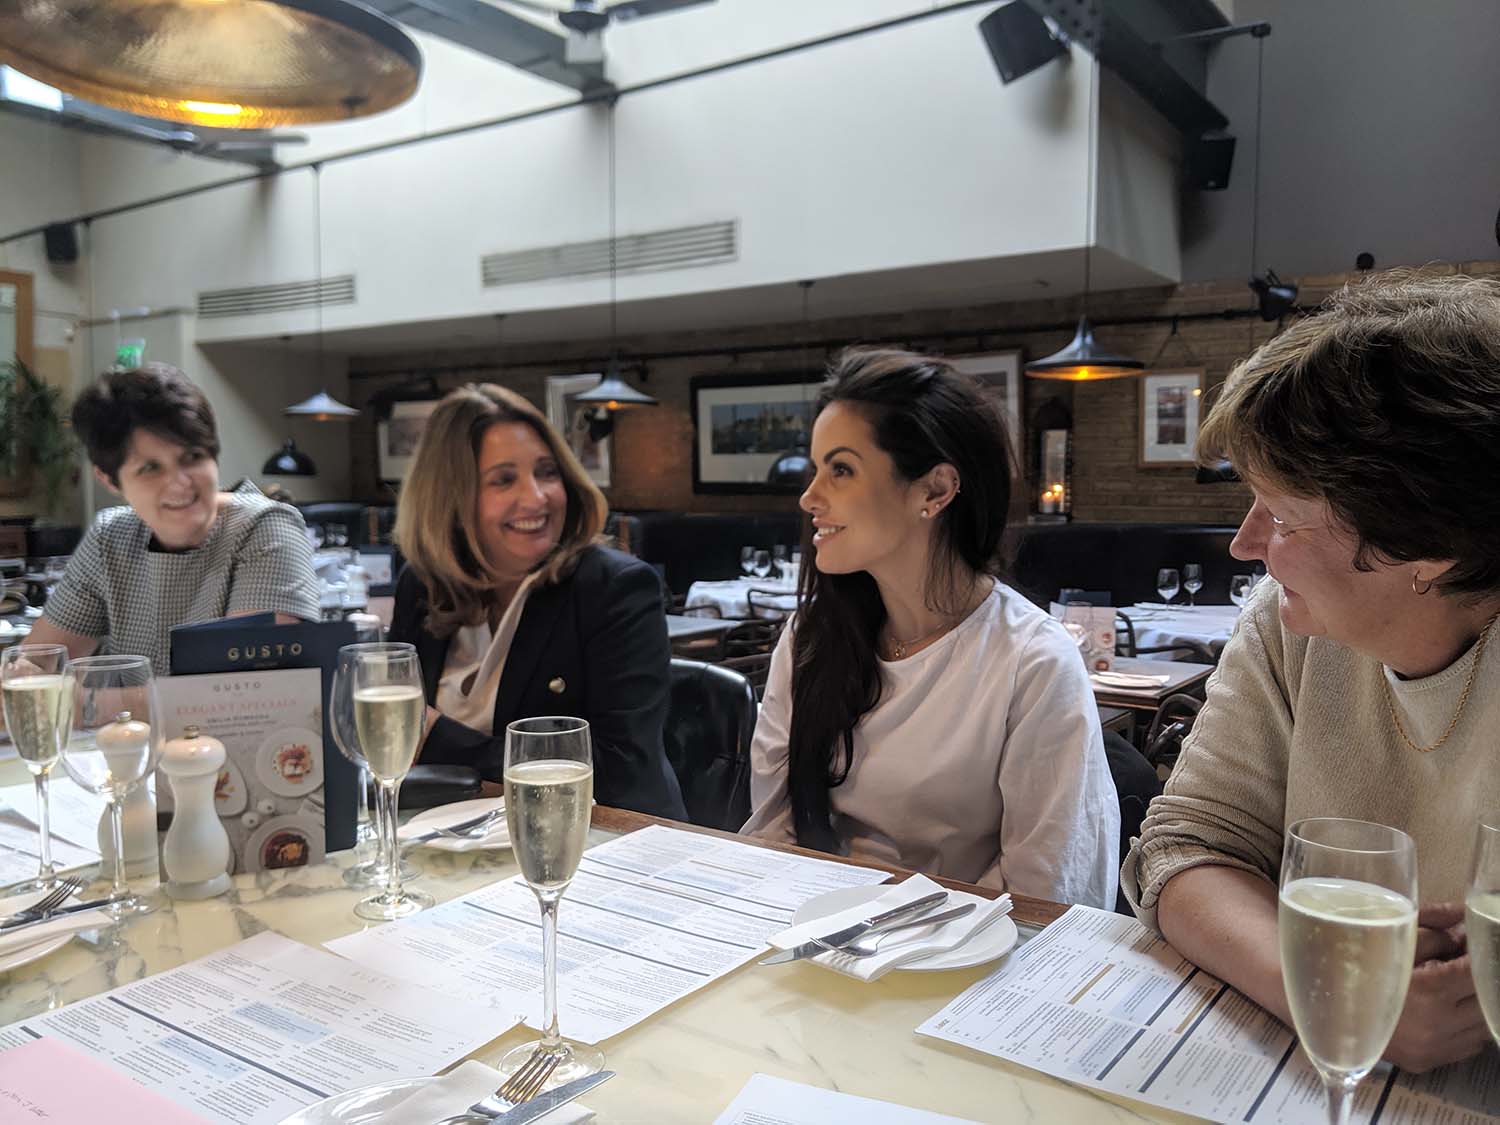 4 women sitting at a table in a resturant smiling at one another